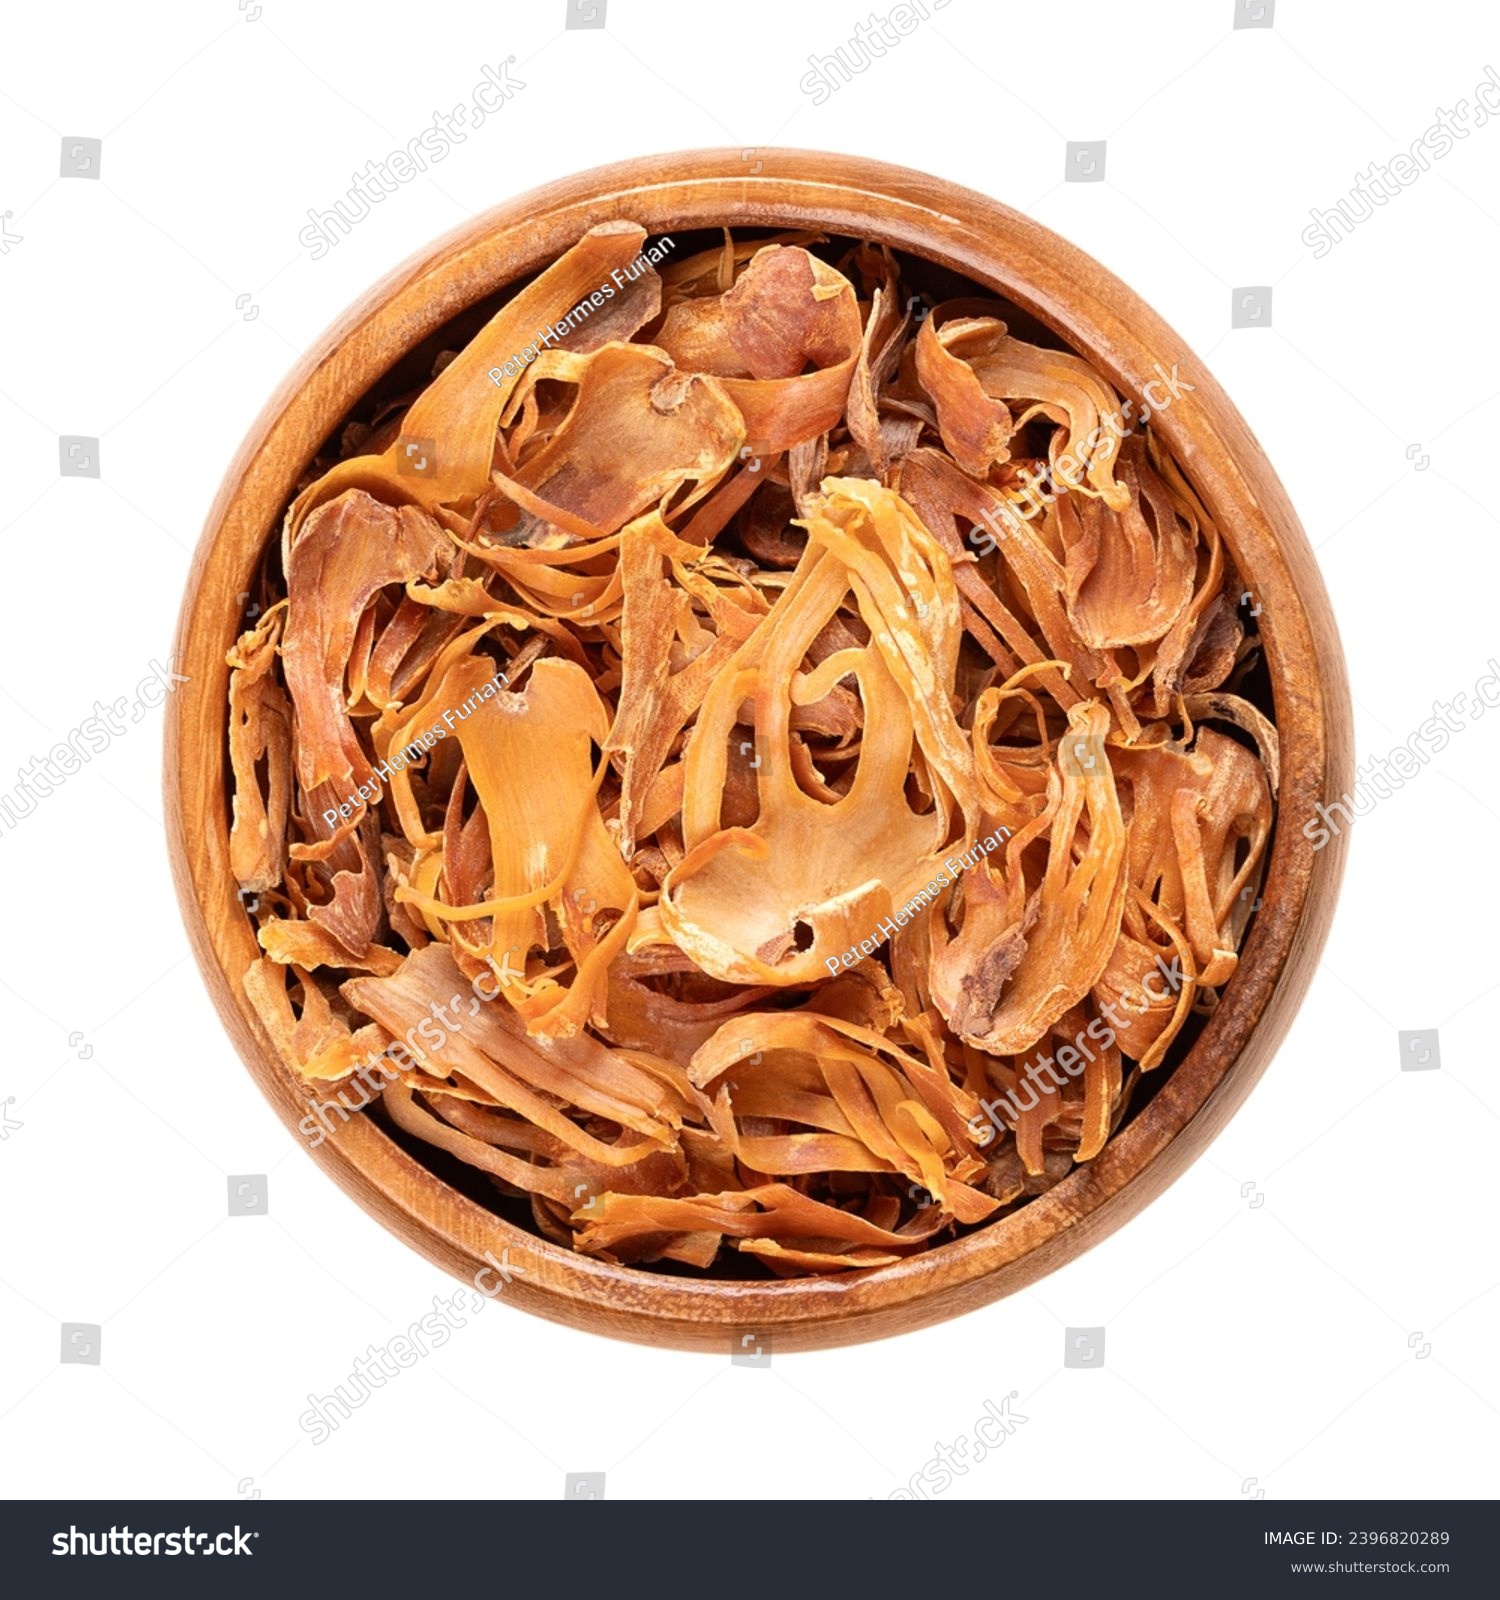 Dried mace in a wooden bowl. Spice with pale yellow and orange tan, made of seed coverings of nutmeg seeds, with similar flavor, but more delicate. Used to flavor food and in preserving and pickeling. #2396820289